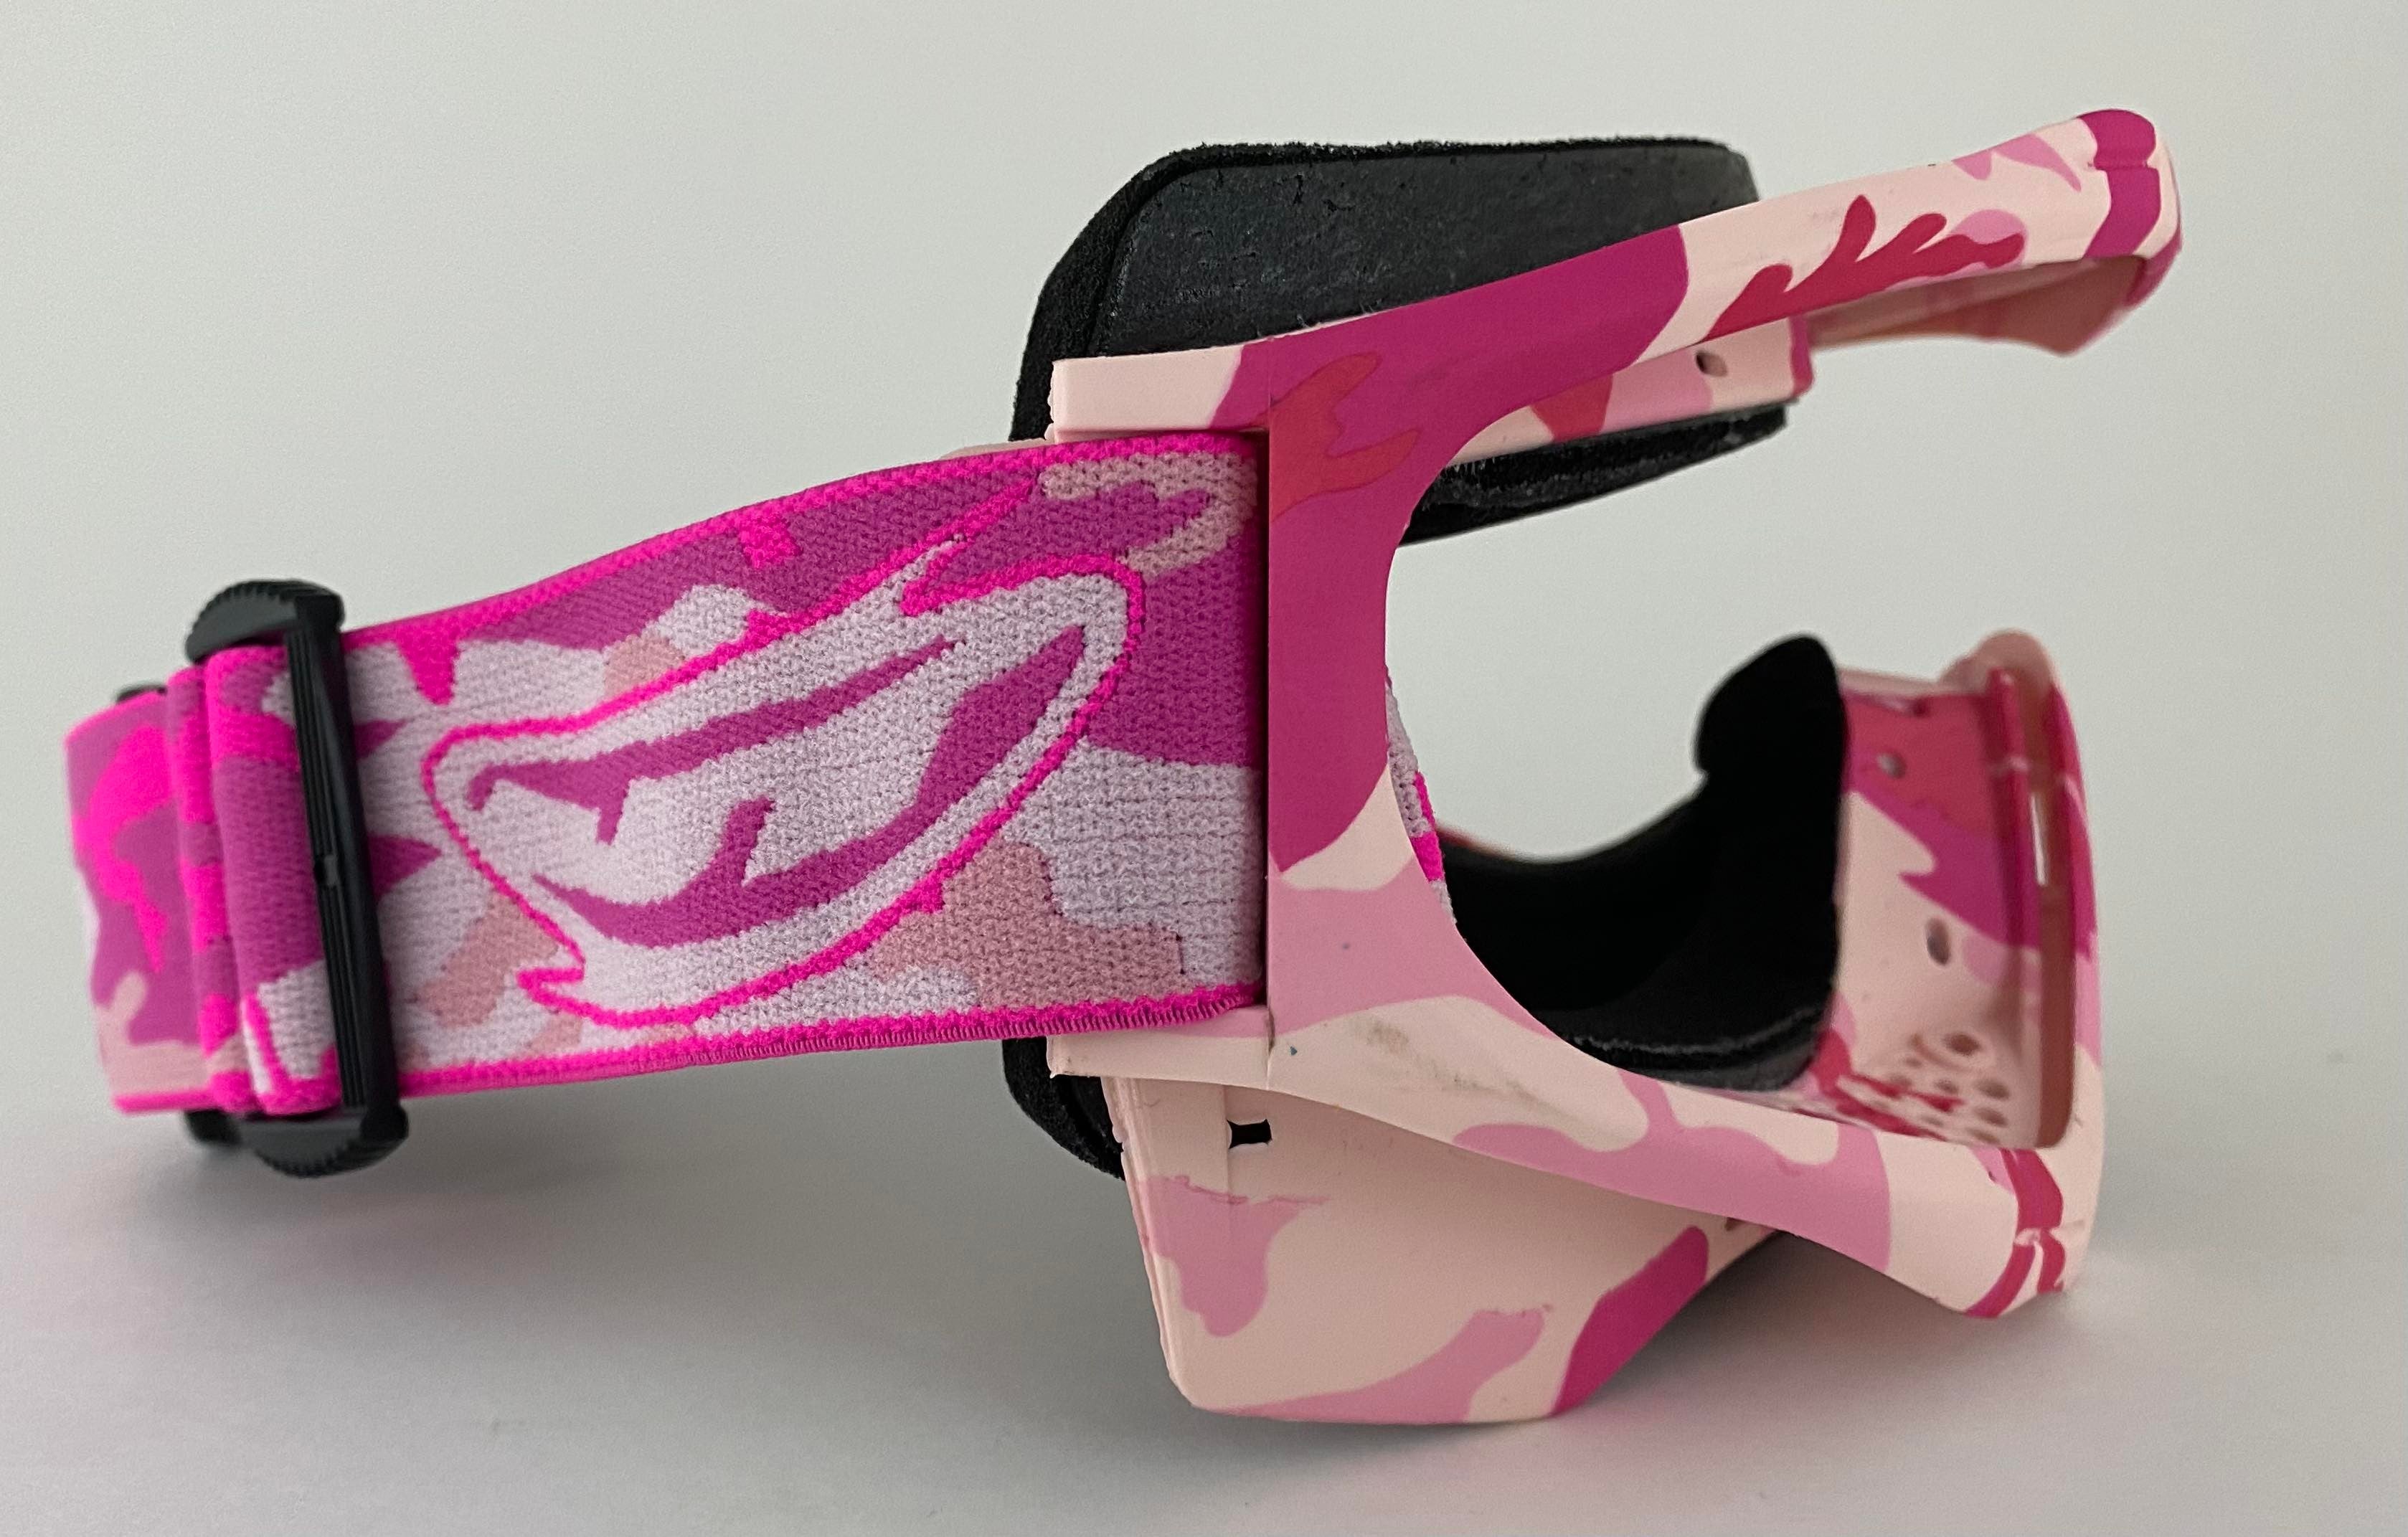 NEW LE Woven Pink White Racing Strap JT Proflex Paintball Mask Goggle